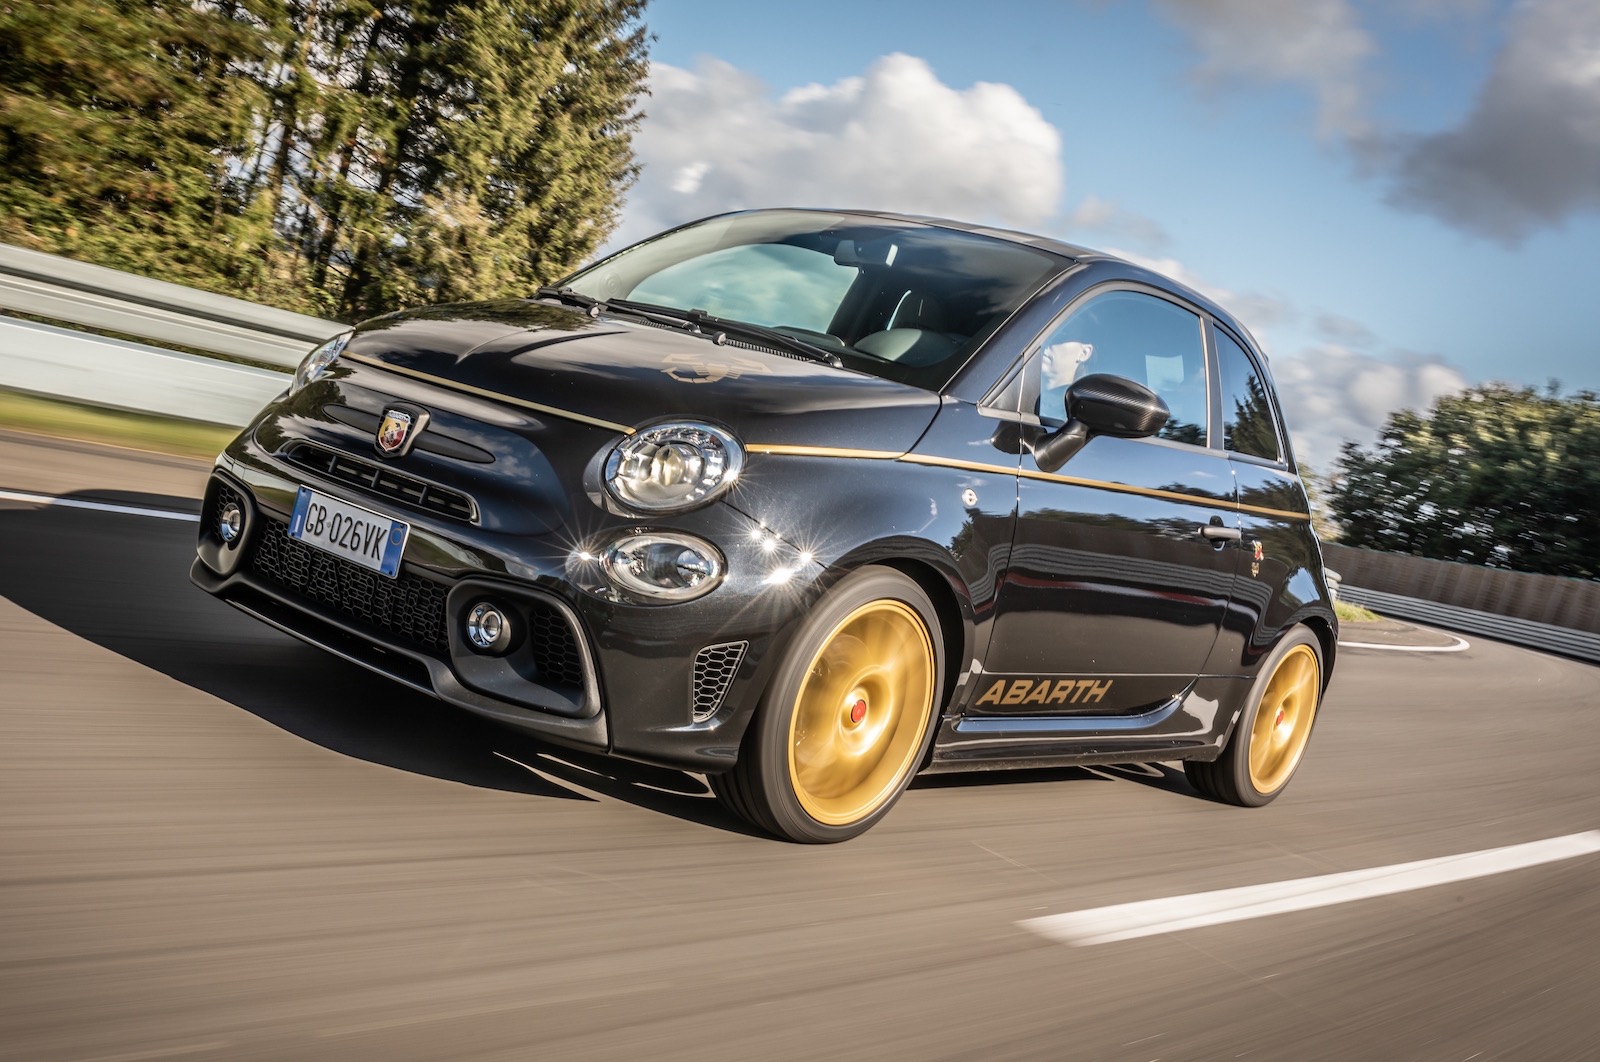 Abarth 595 Scorpioneoro announced, throwback to 1979 ‘Gold Ring’